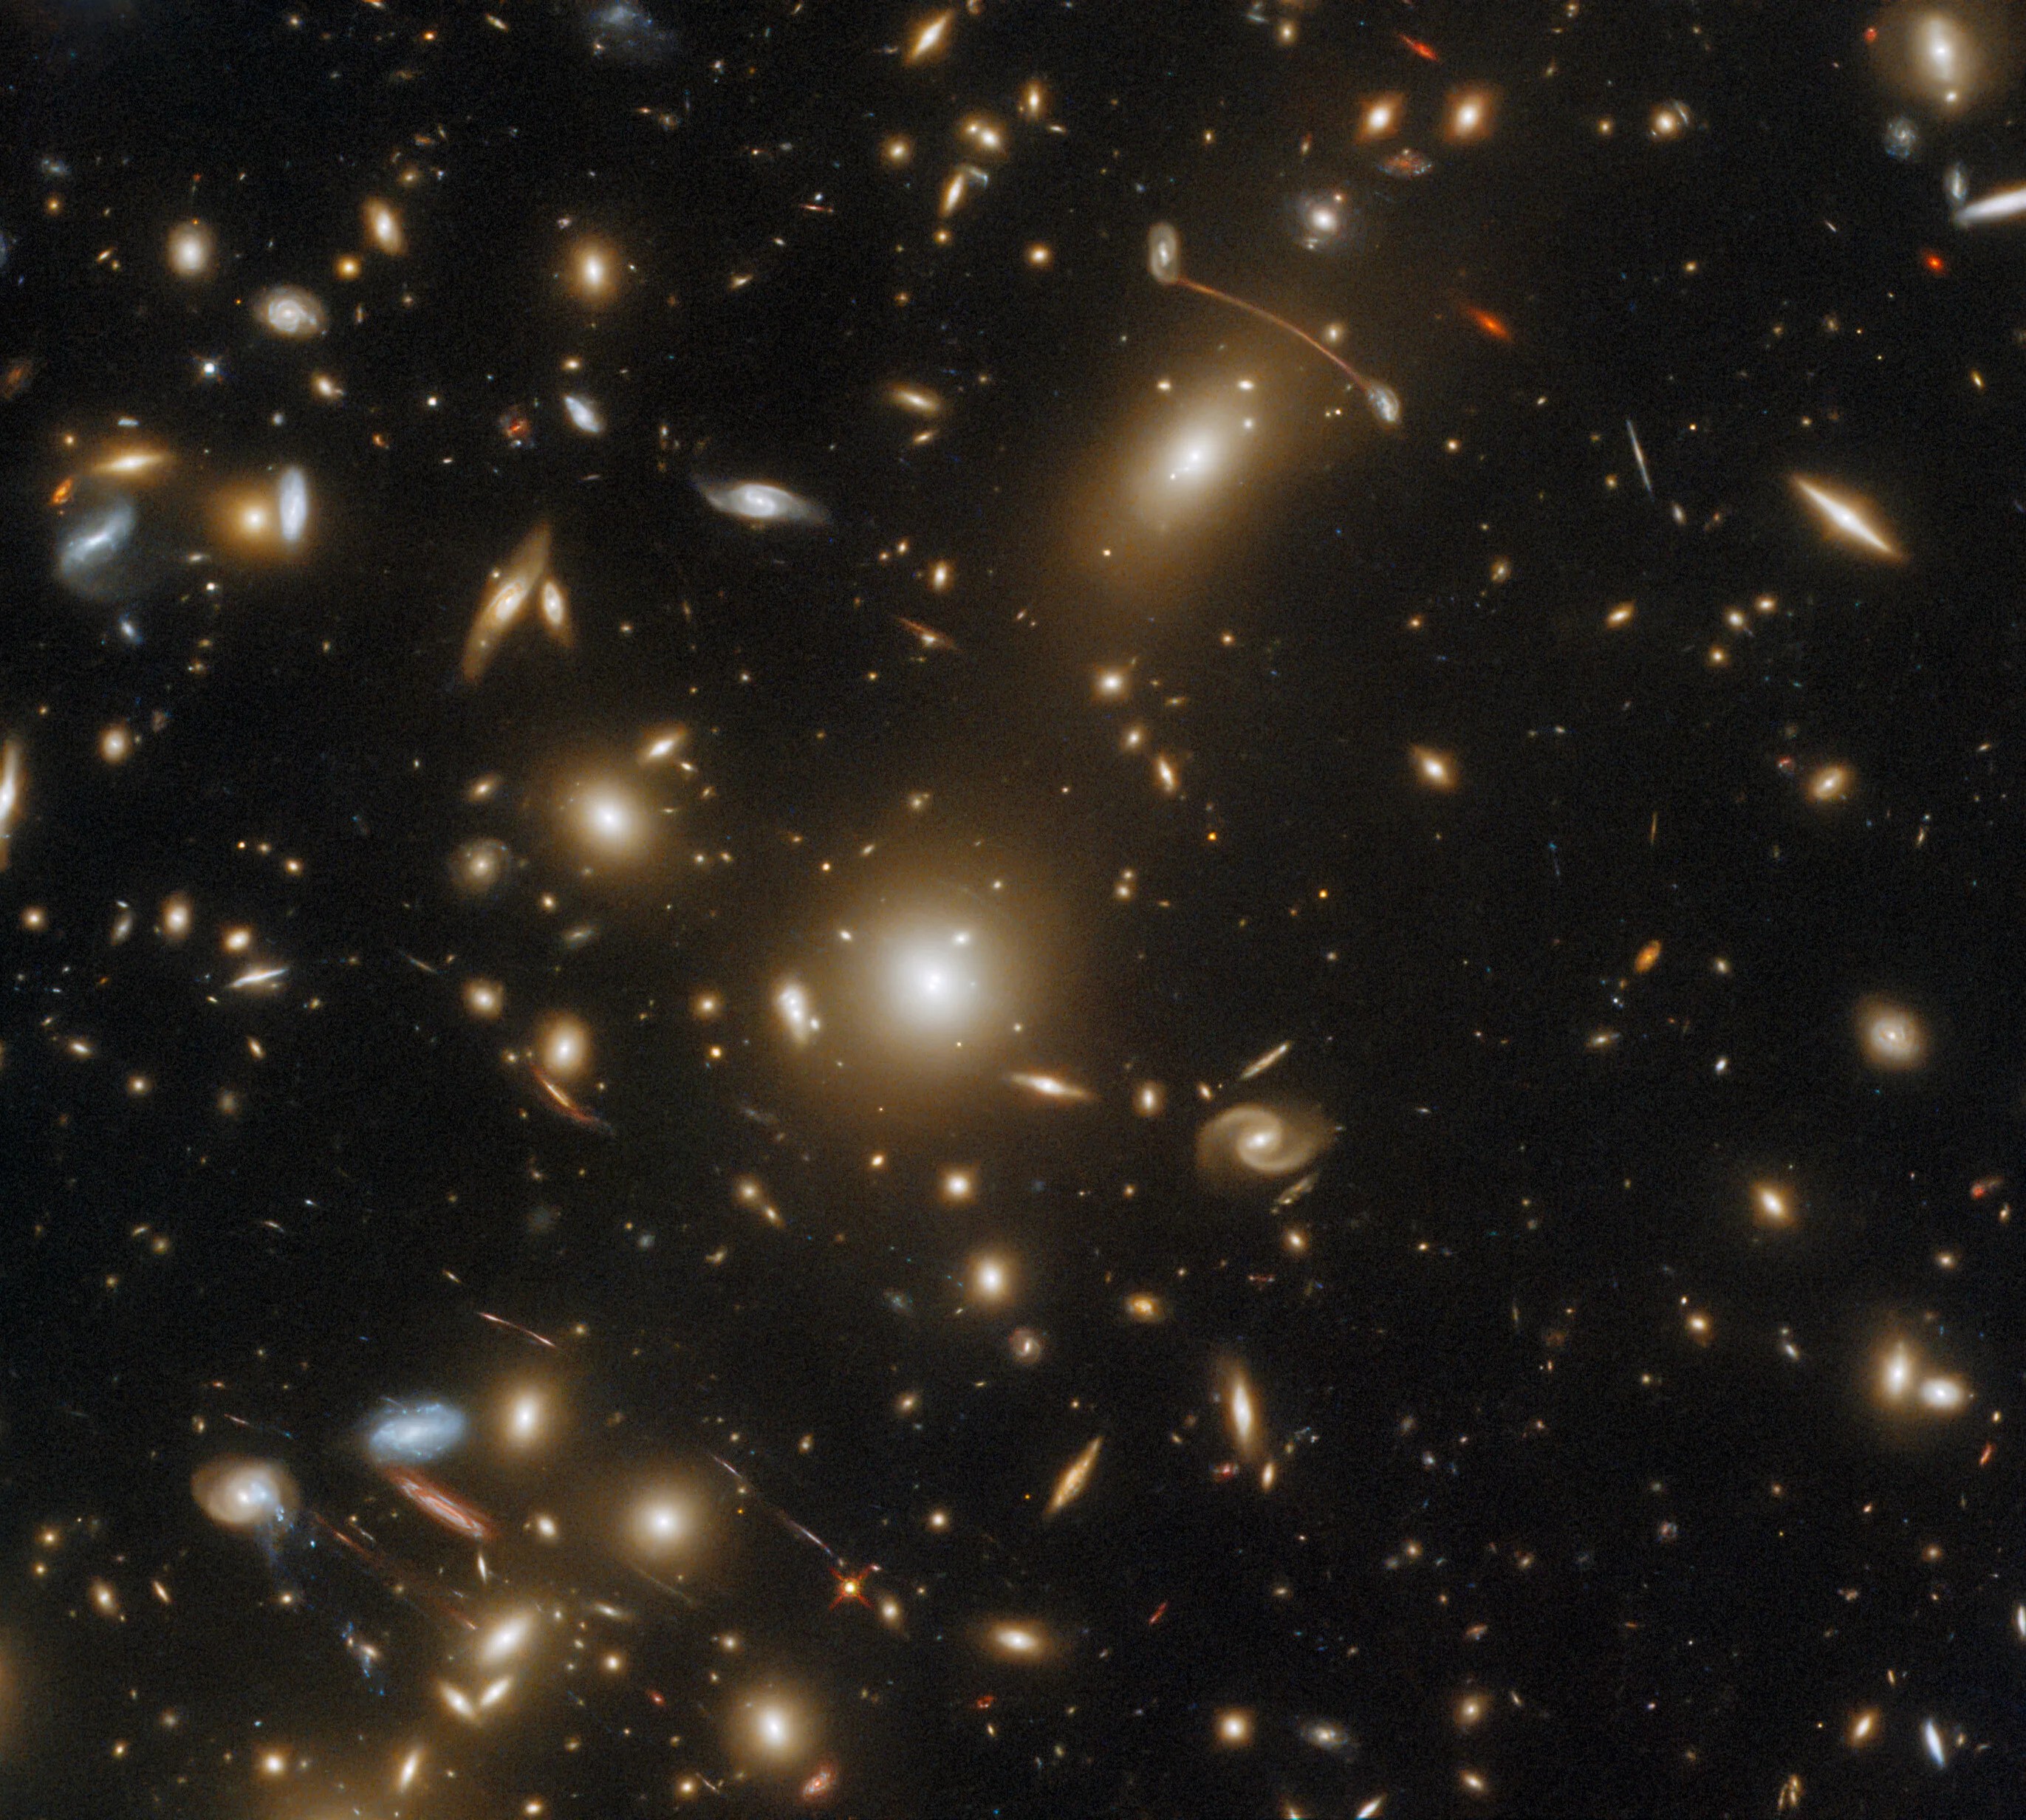 Galaxies in all shapes and sizes fill the screen. most are gold in color, but a few appear red and blue-white. long thin arcs of gravitationally lensed light arc around the center of the image.